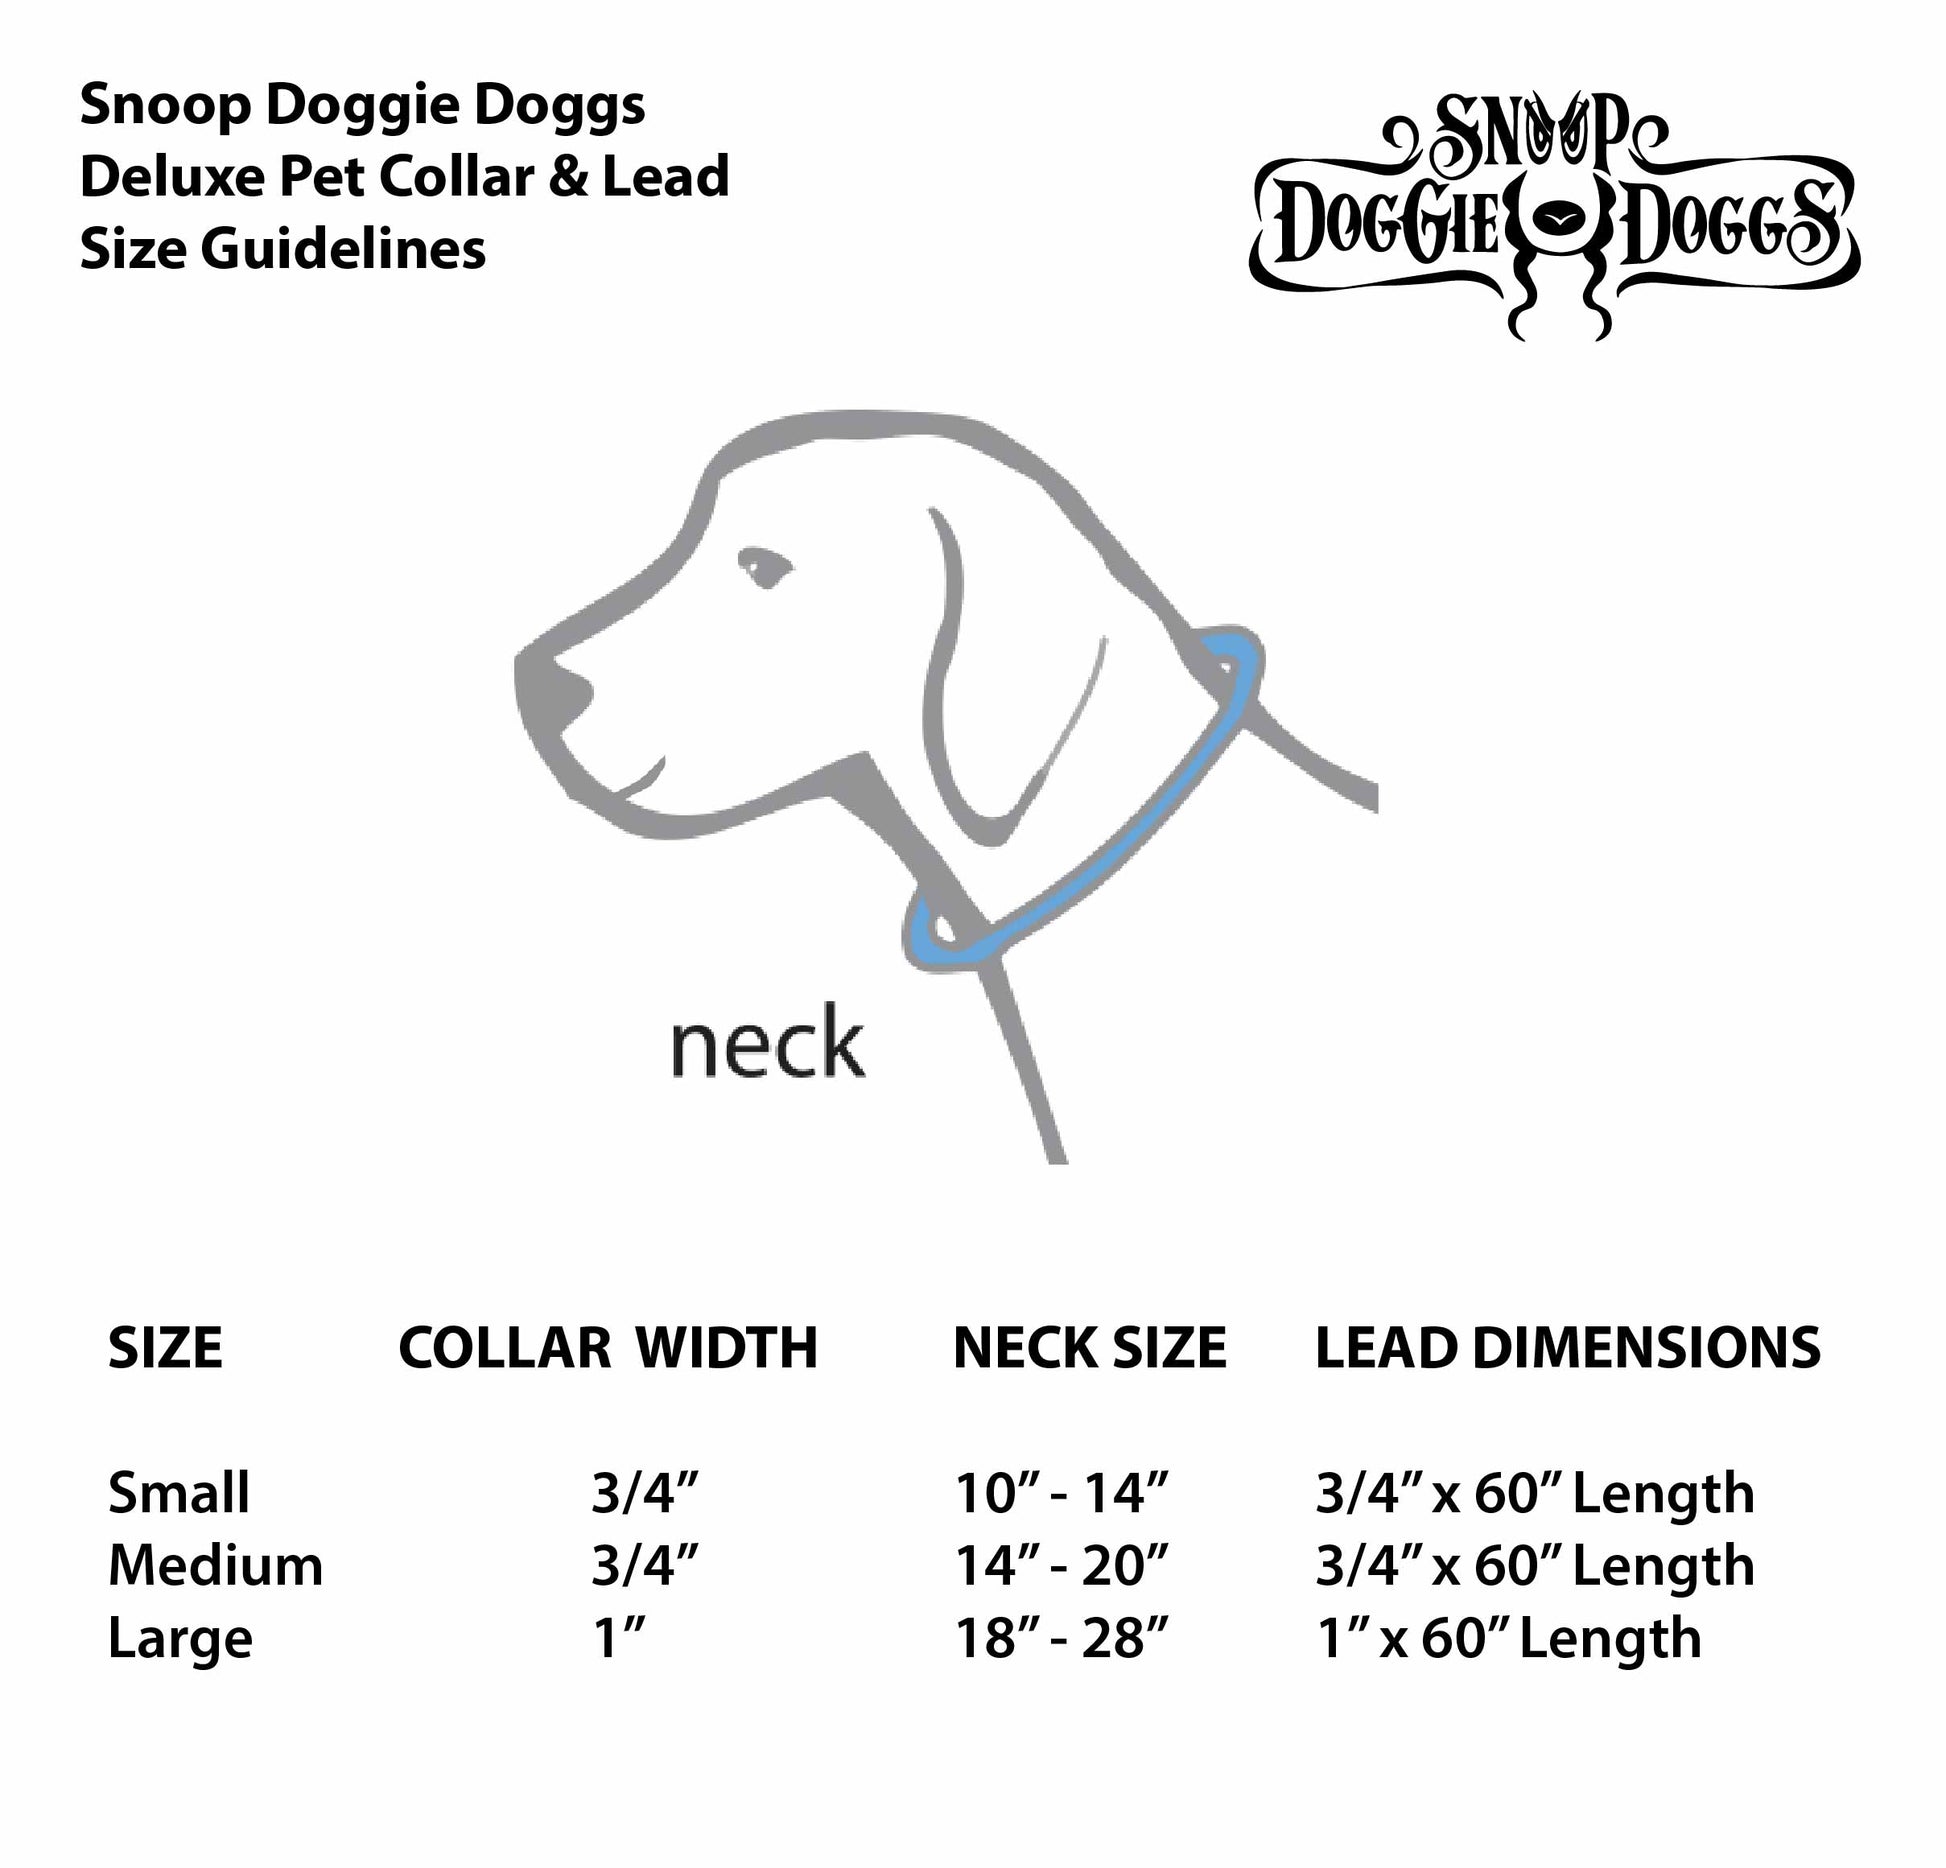 Halftime Deluxe Pet Collar size chart for sizes Small, Medium and Large.